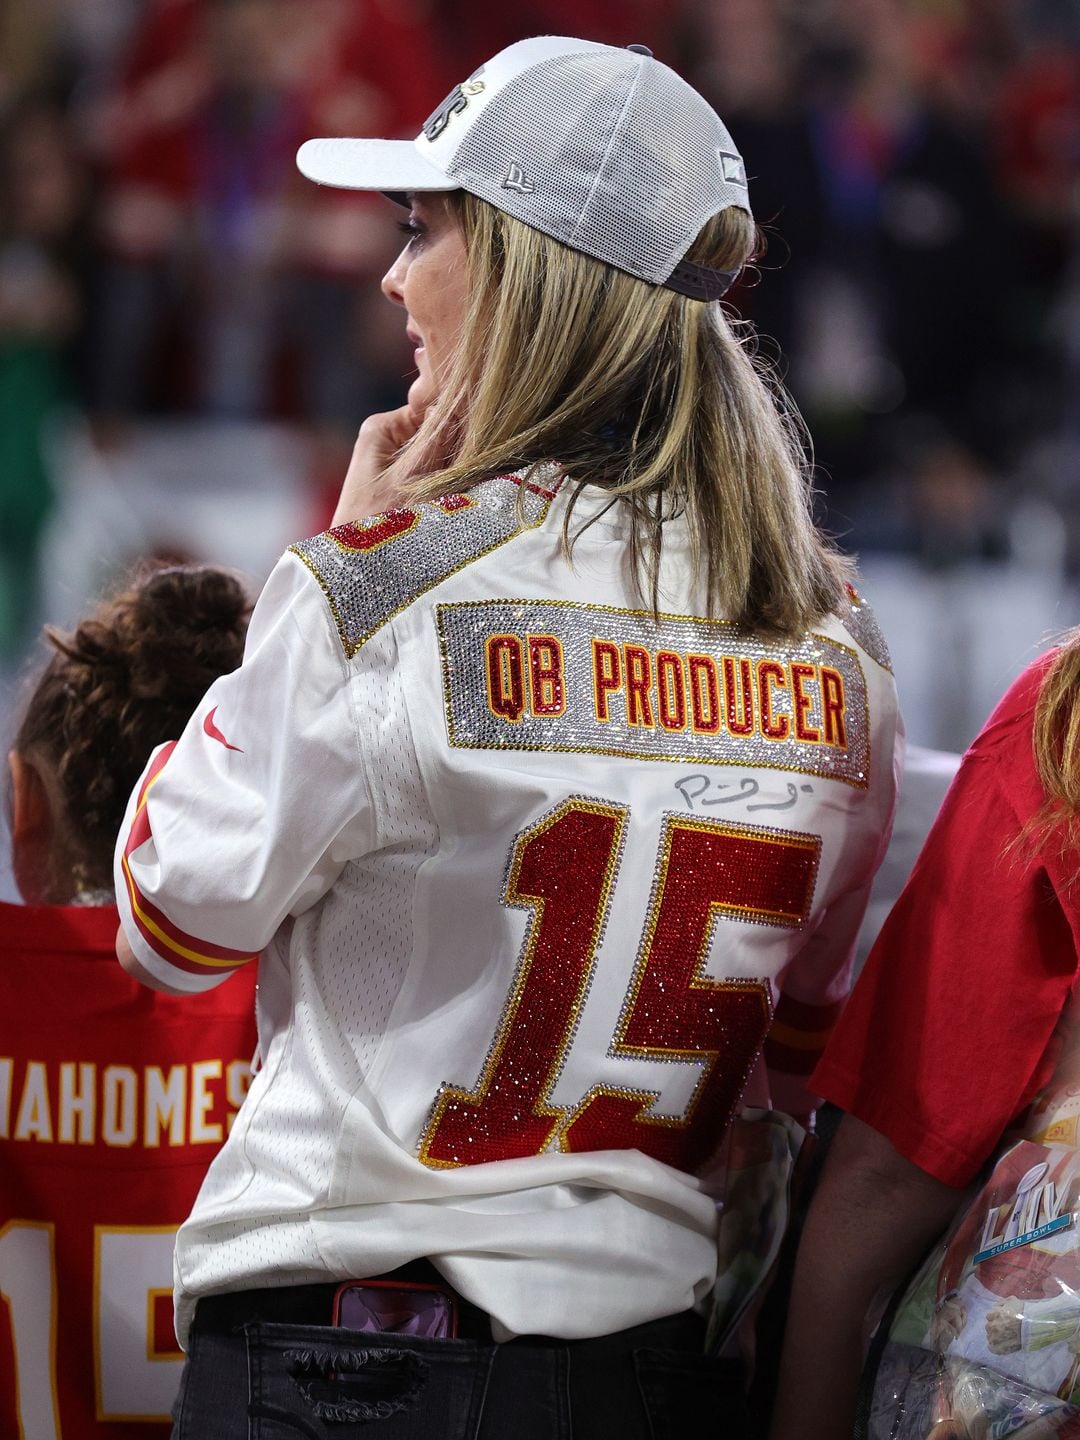 Randi Martin watching a Kansas City Chiefs game in 2020, her back is to the camera and her shirt says QB Producer